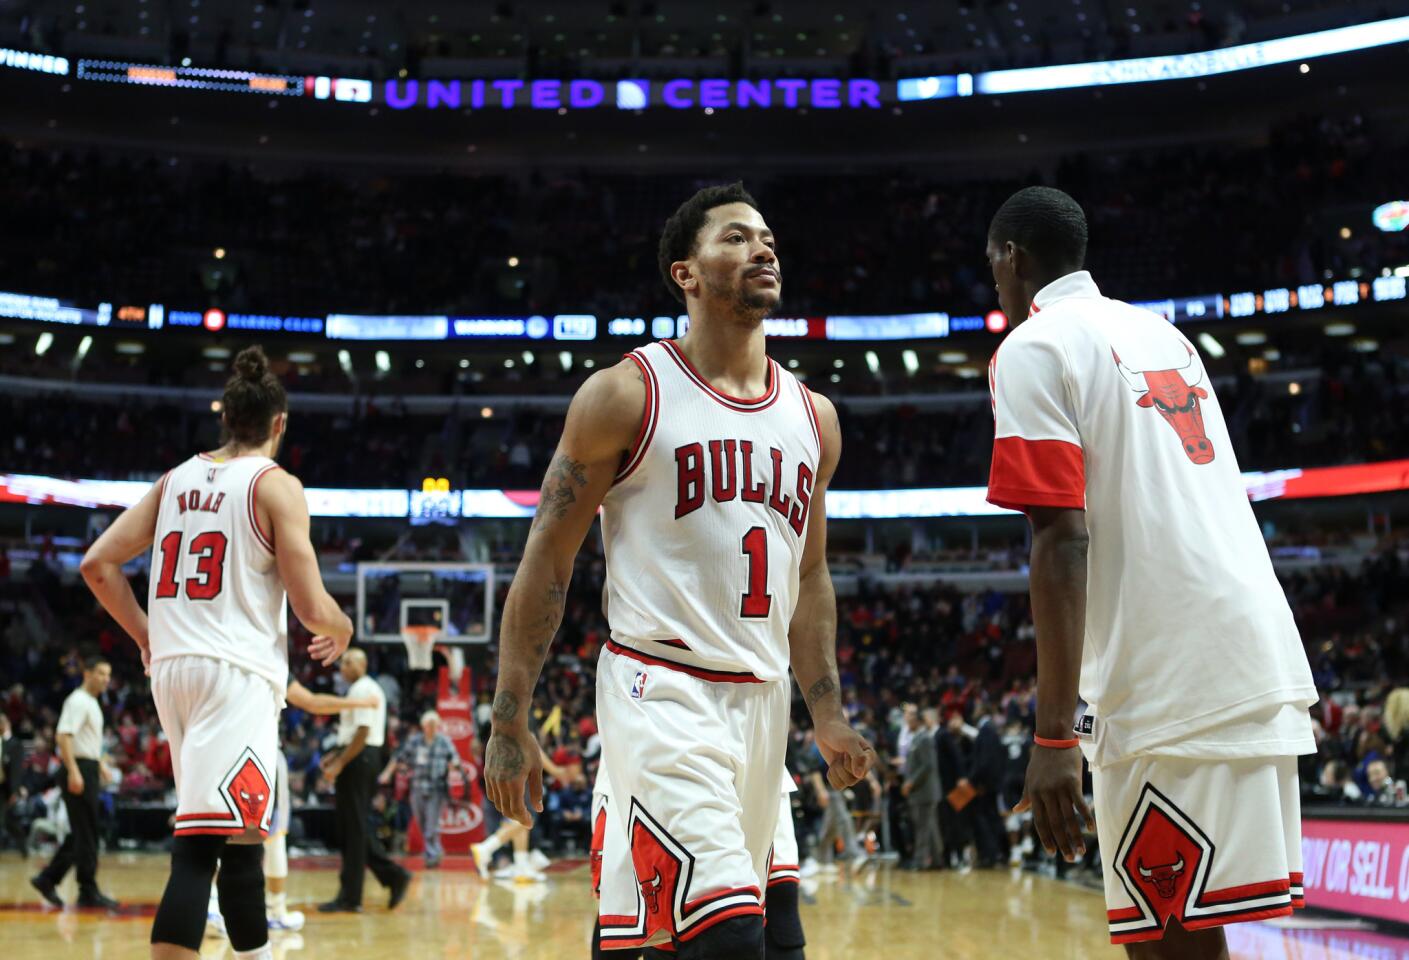 Derrick Rose walks off the floor after losing to the Golden State Warriors.